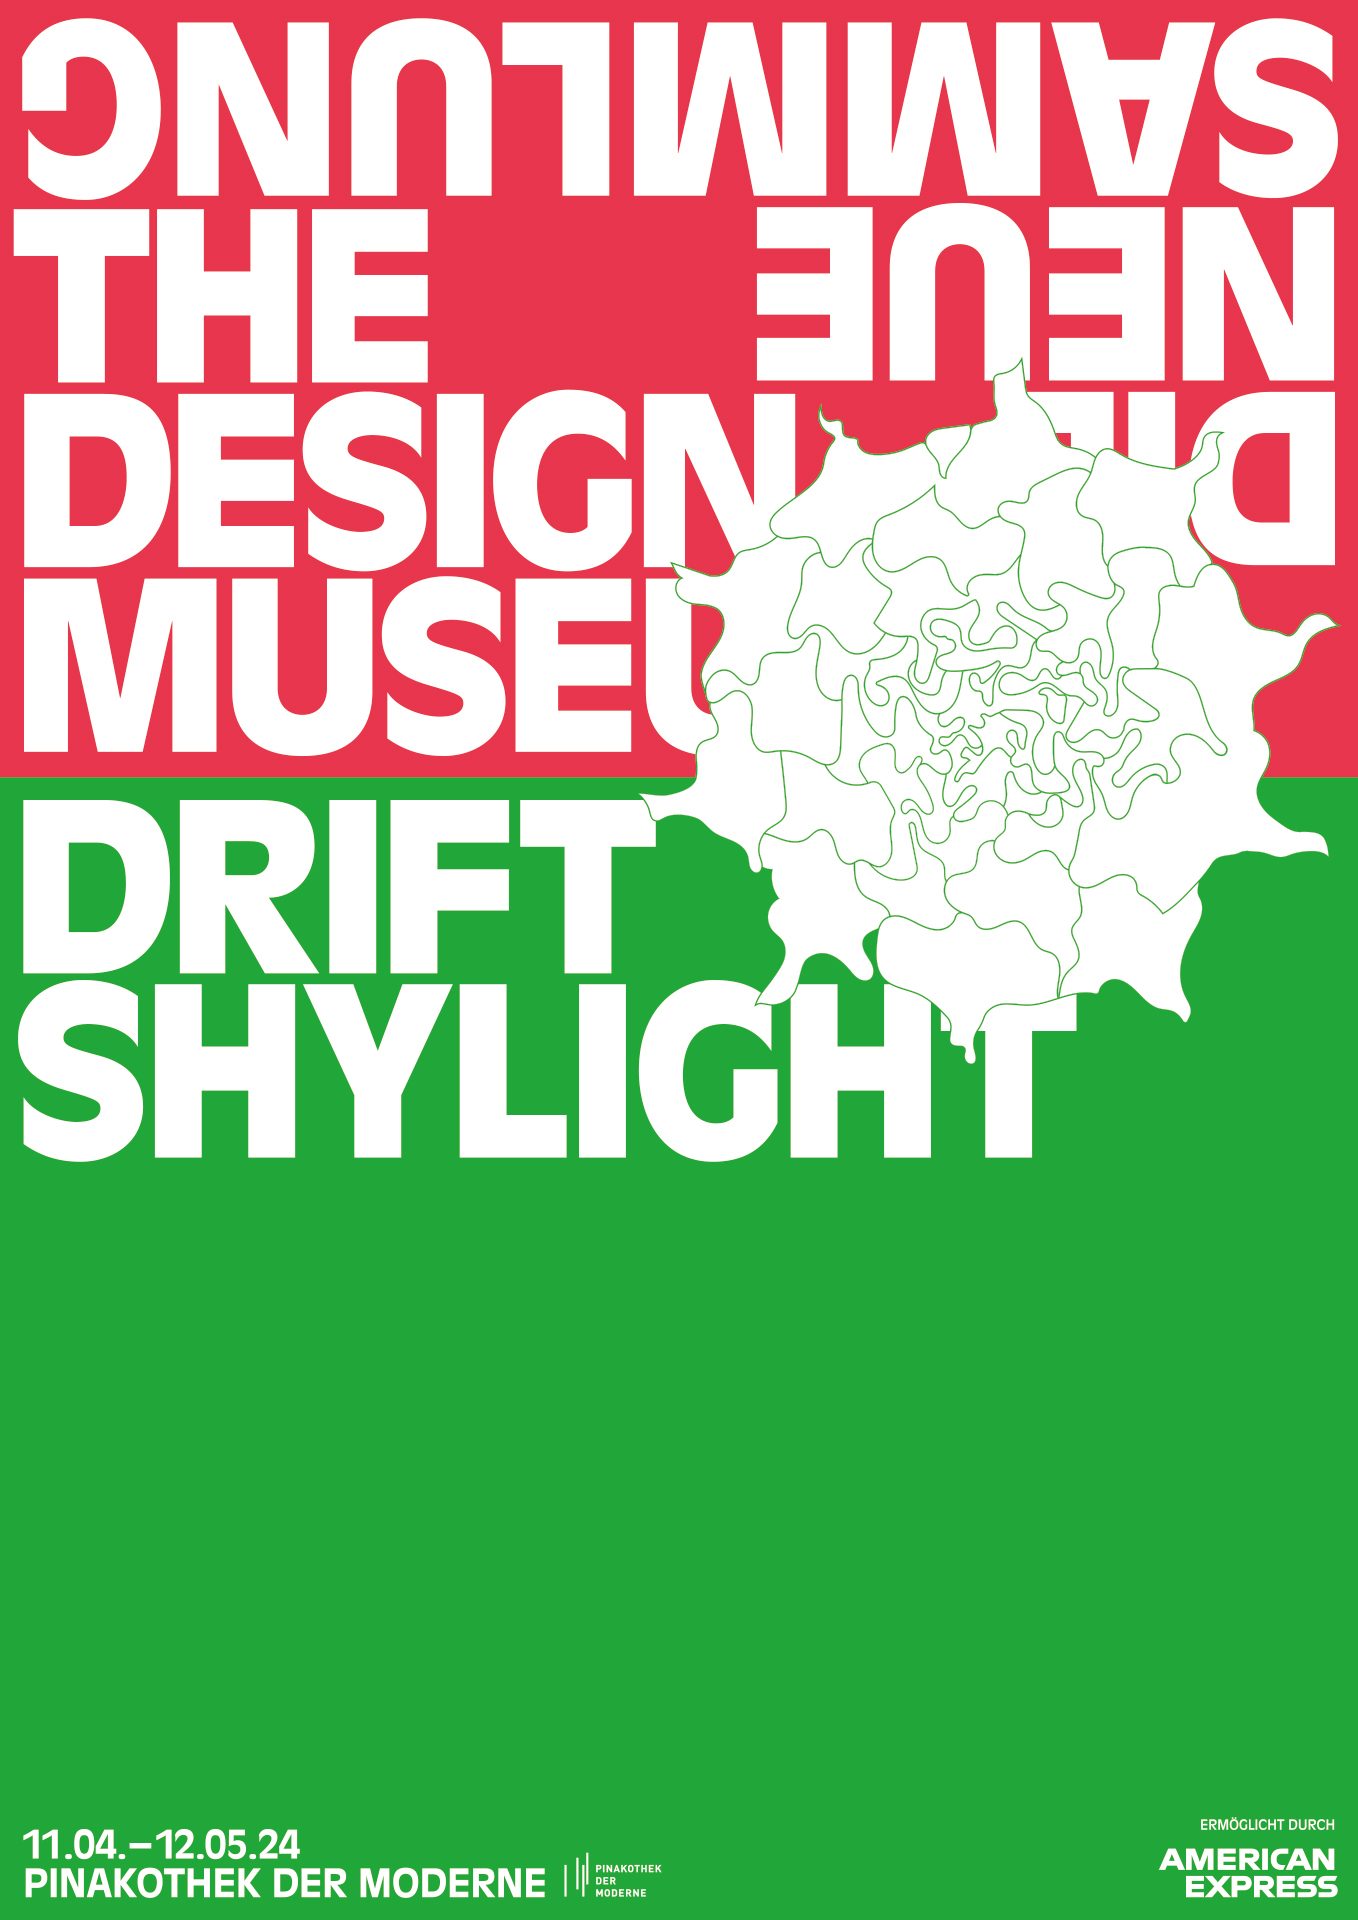 Exhibition poster. The red logo of The New Collection at the top. Below is the title and duration of the exhibition against a green background. Both are overlaid by a graphic depicting a light.